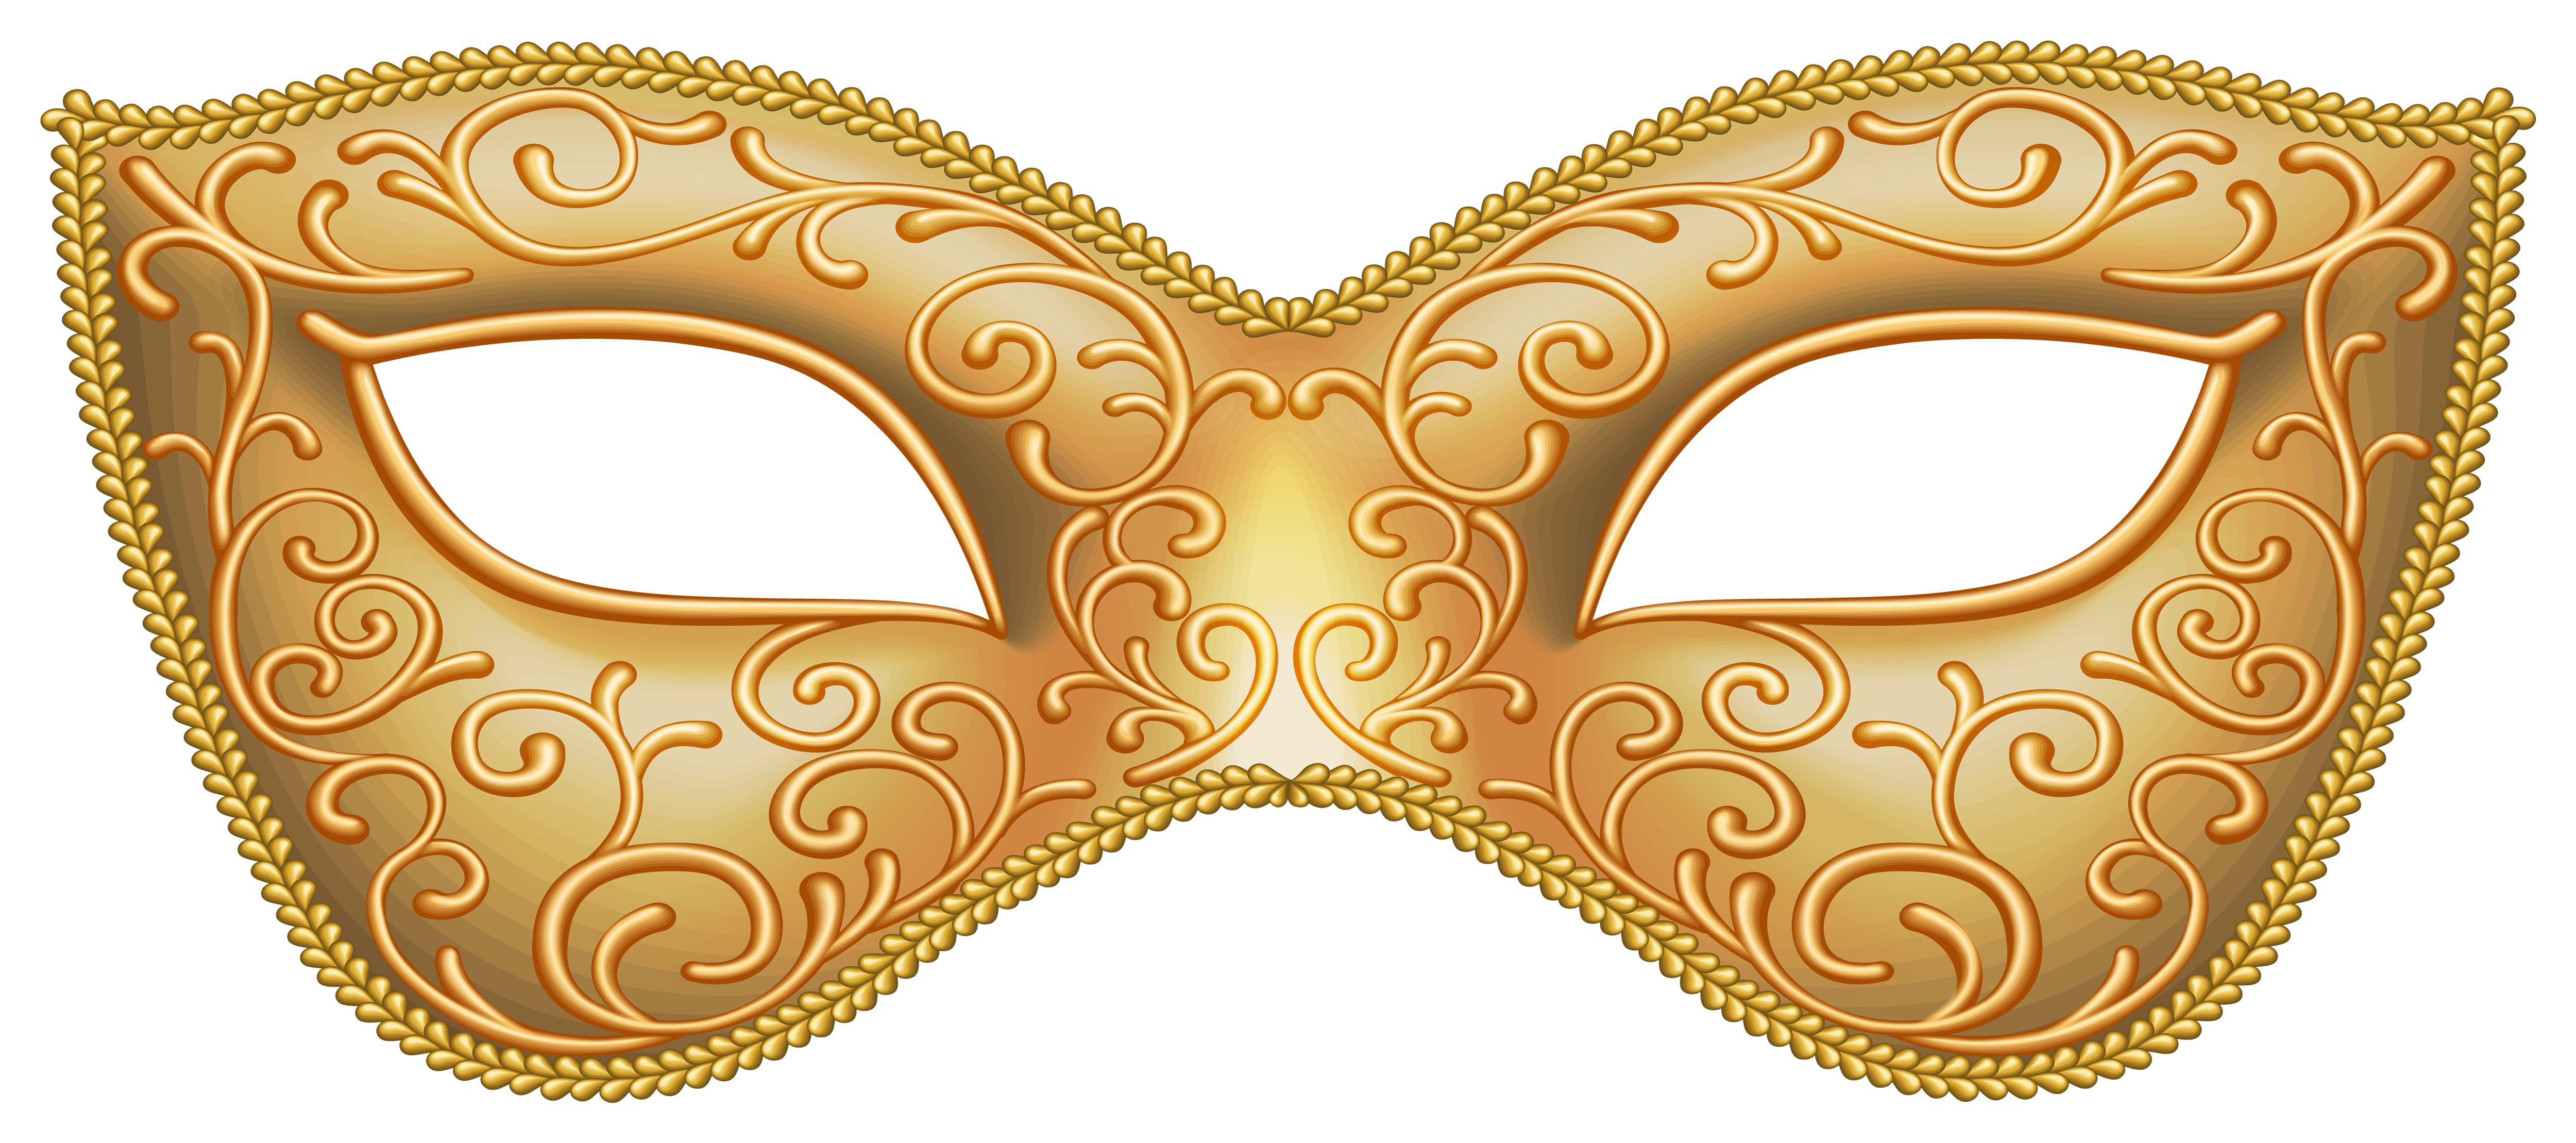 Gold Carnival Mask Transparent Image Gallery Yopriceville High Quality Images And Transparent Png Free Clipart